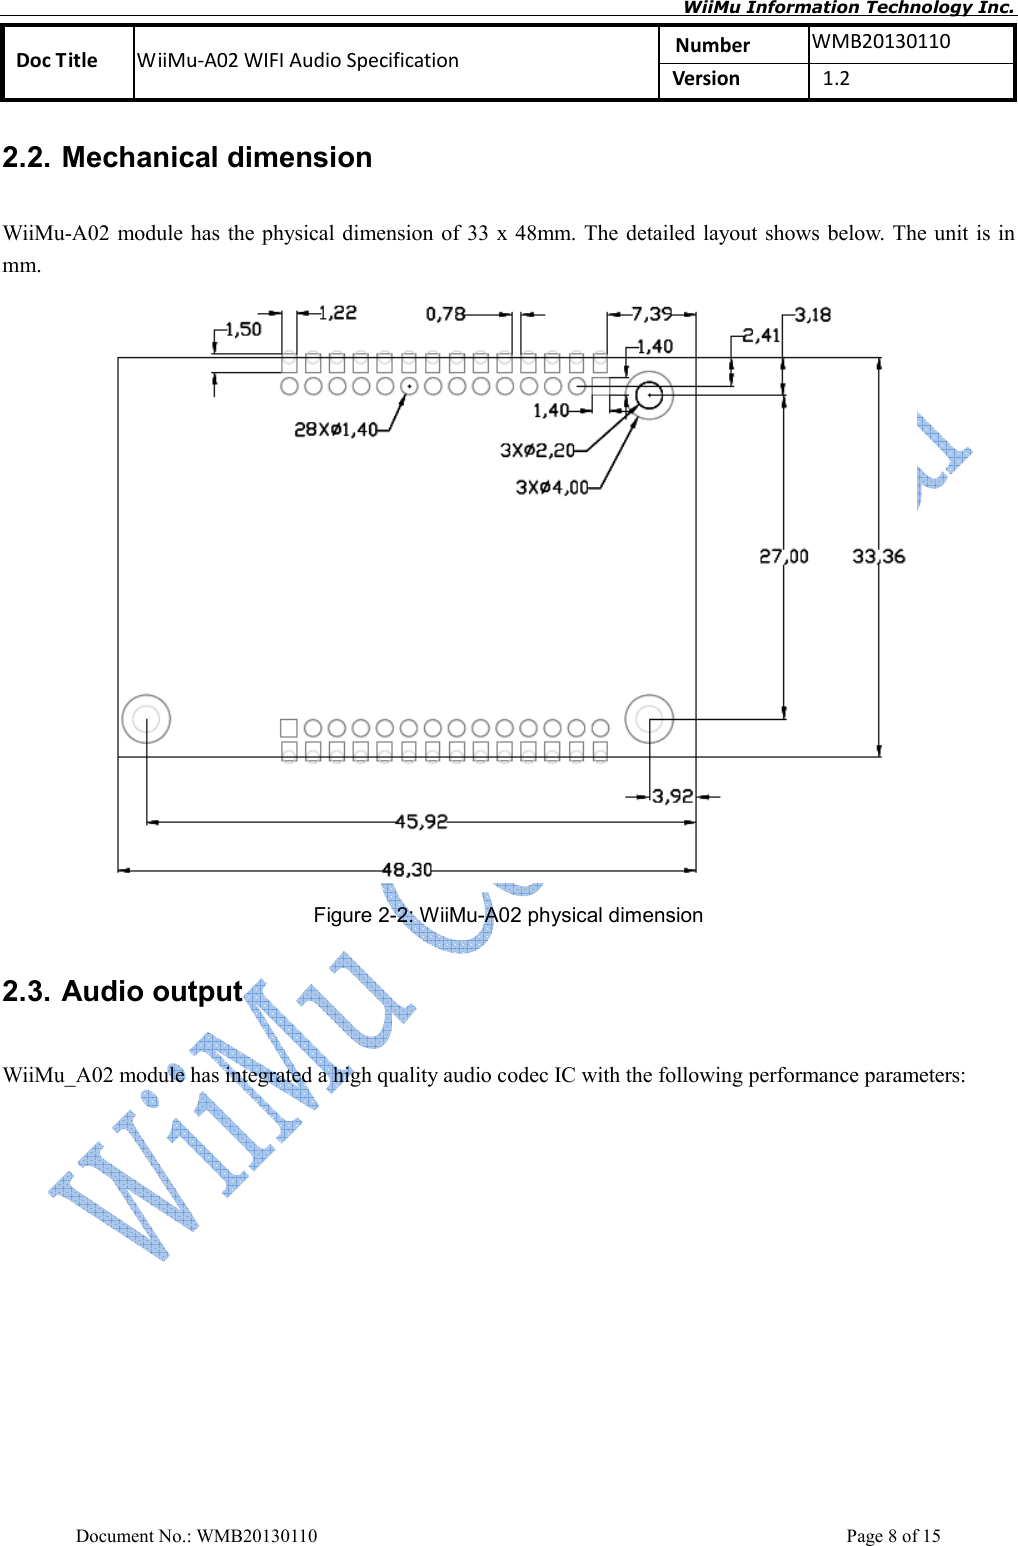       WiiMu Information Technology Inc. Number  WMB20130110 Doc Title  WiiMu-A02 WIFI Audio Specification  Version    1.2  Document No.: WMB20130110    Page 8 of 15 2.2. Mechanical dimension WiiMu-A02 module has the physical dimension of 33 x 48mm. The detailed layout shows below. The unit  is in mm.  Figure 2-2: WiiMu-A02 physical dimension   2.3. Audio output WiiMu_A02 module has integrated a high quality audio codec IC with the following performance parameters:   